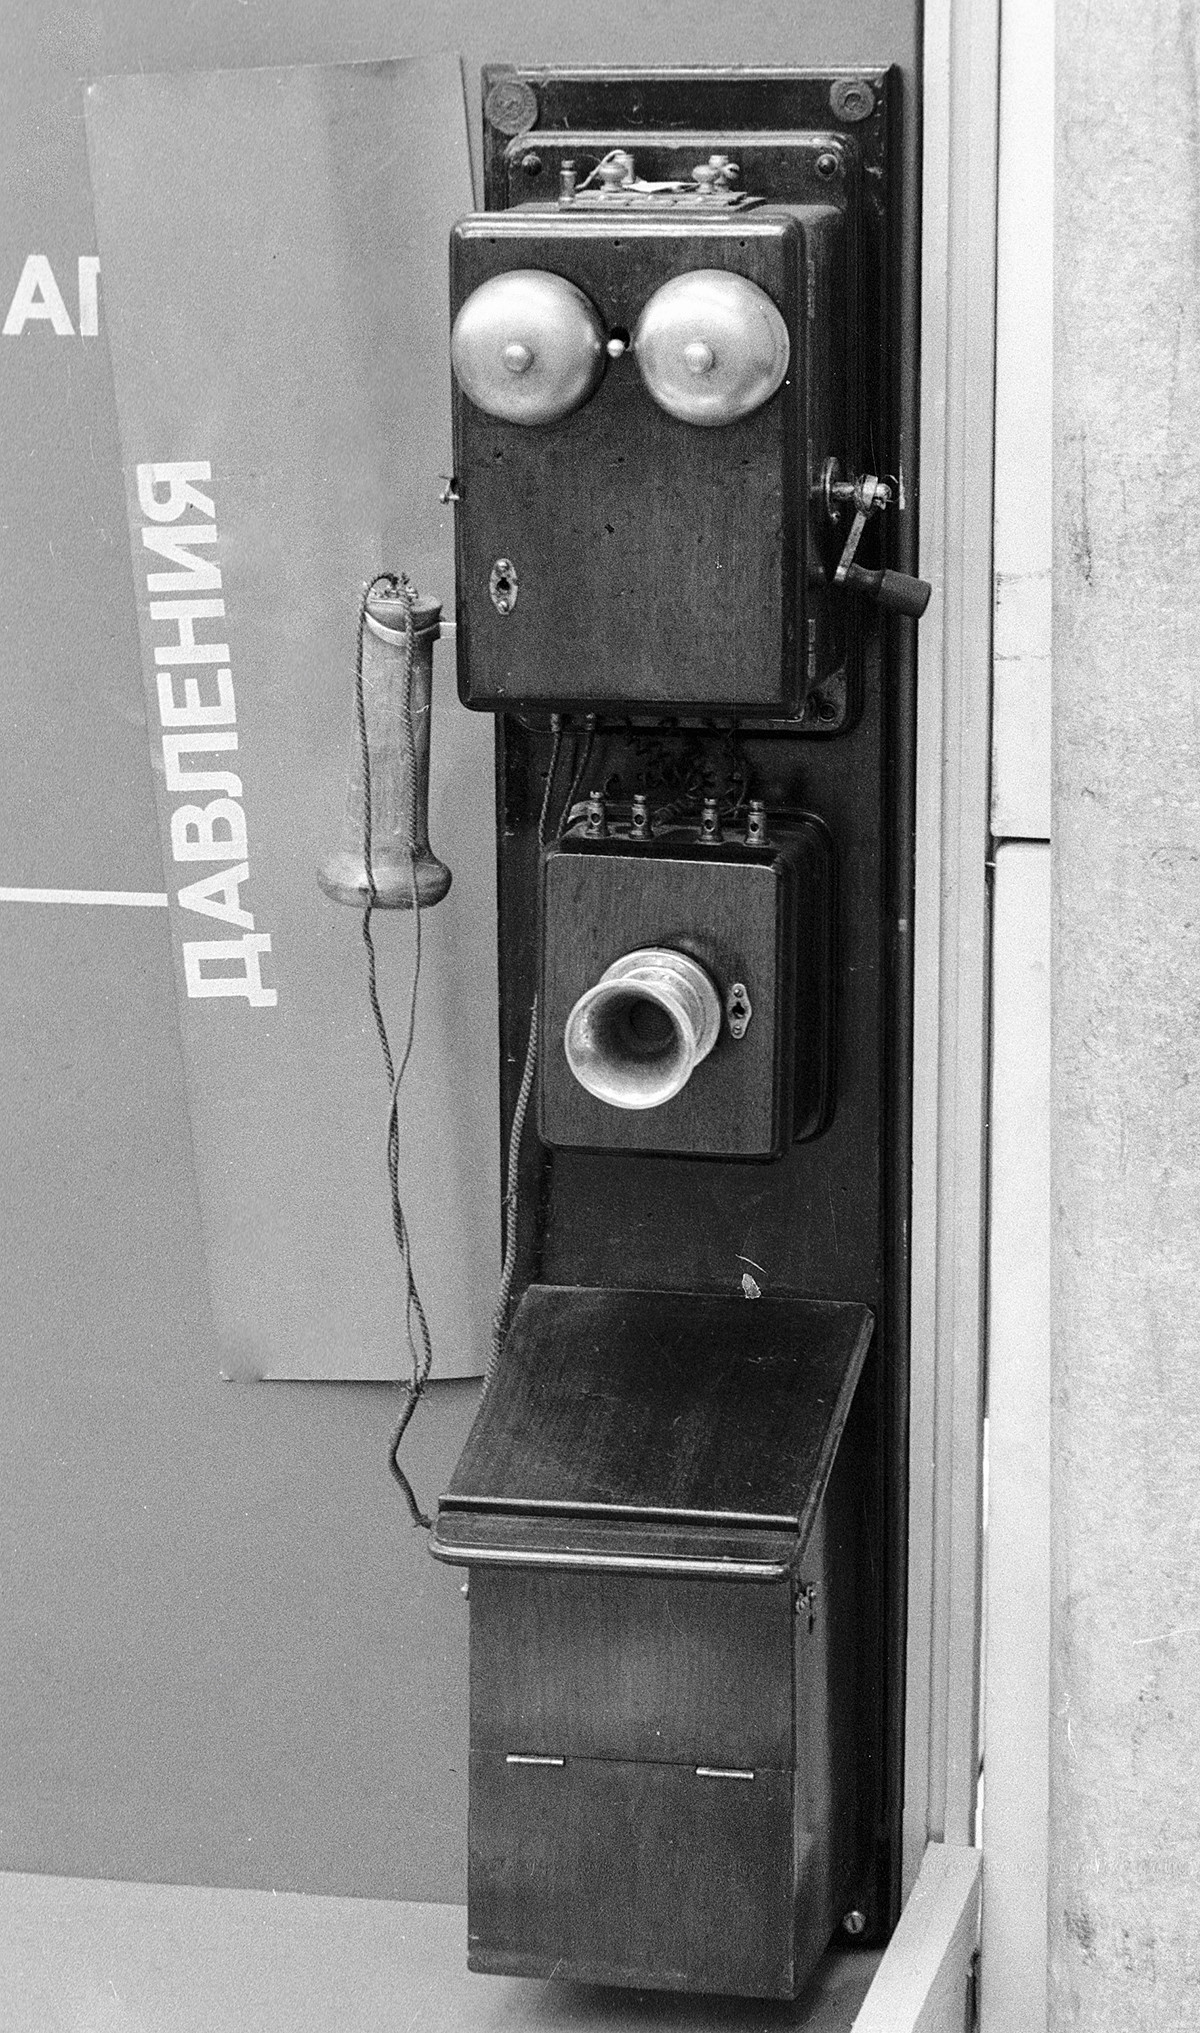 One of the first Alexander Bell's phones installed in Moscow.